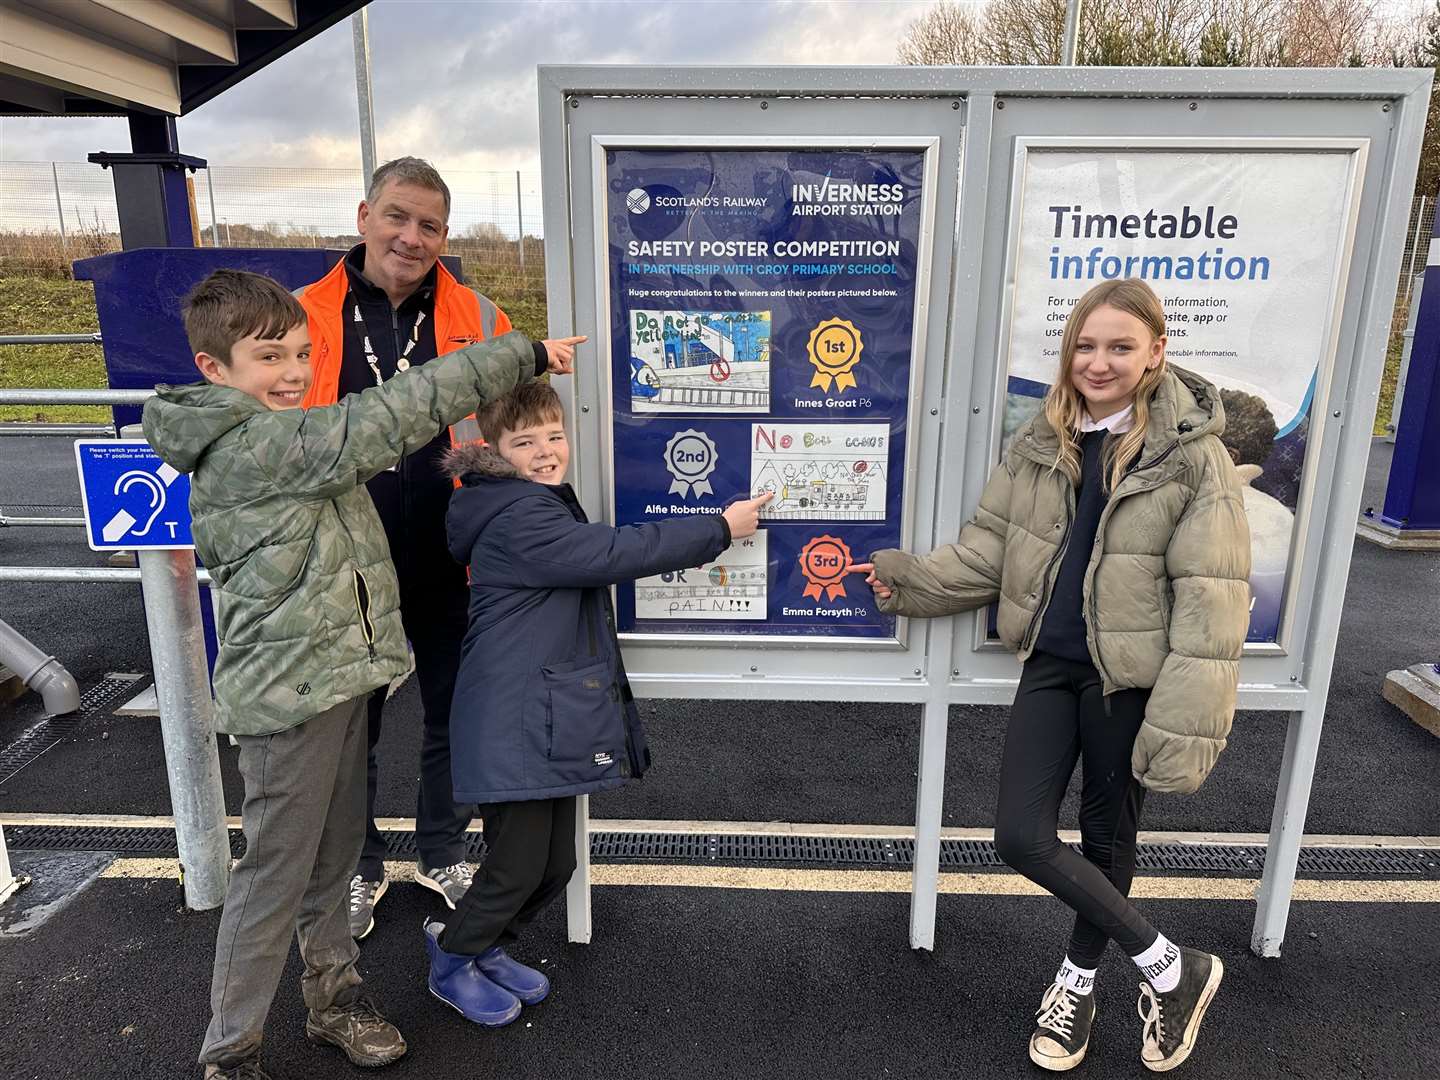 Cawdor Primary Pupils (from left) Innes Groat, Alfie Robertson & Emma Forsyth with Allan Brooking from Network Rail.